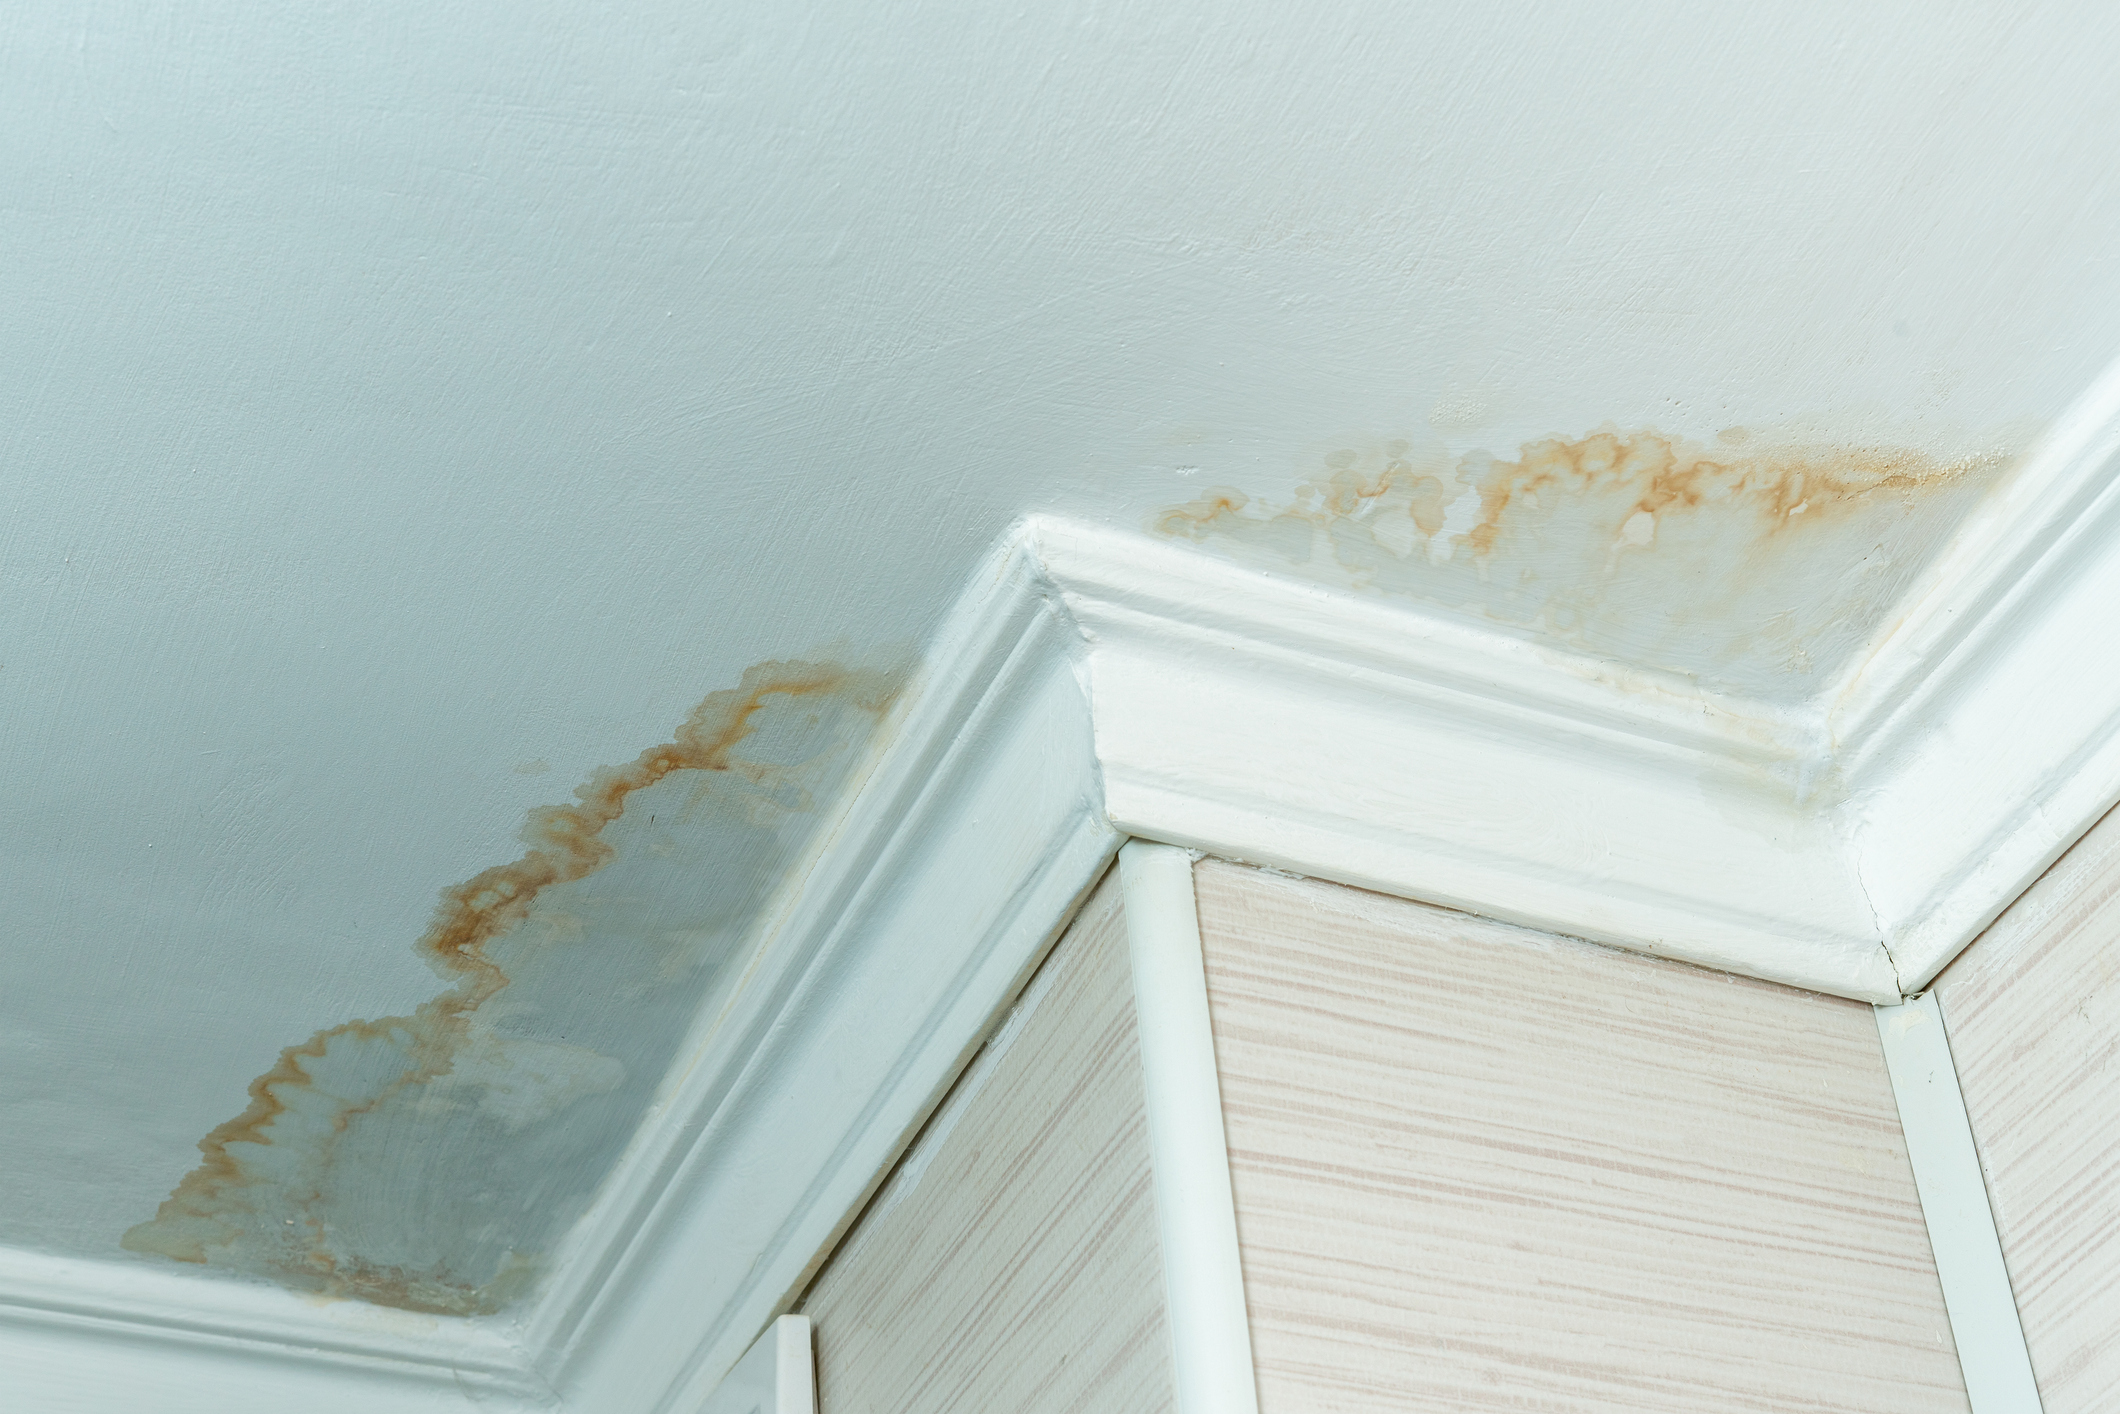 Ceiling water damage